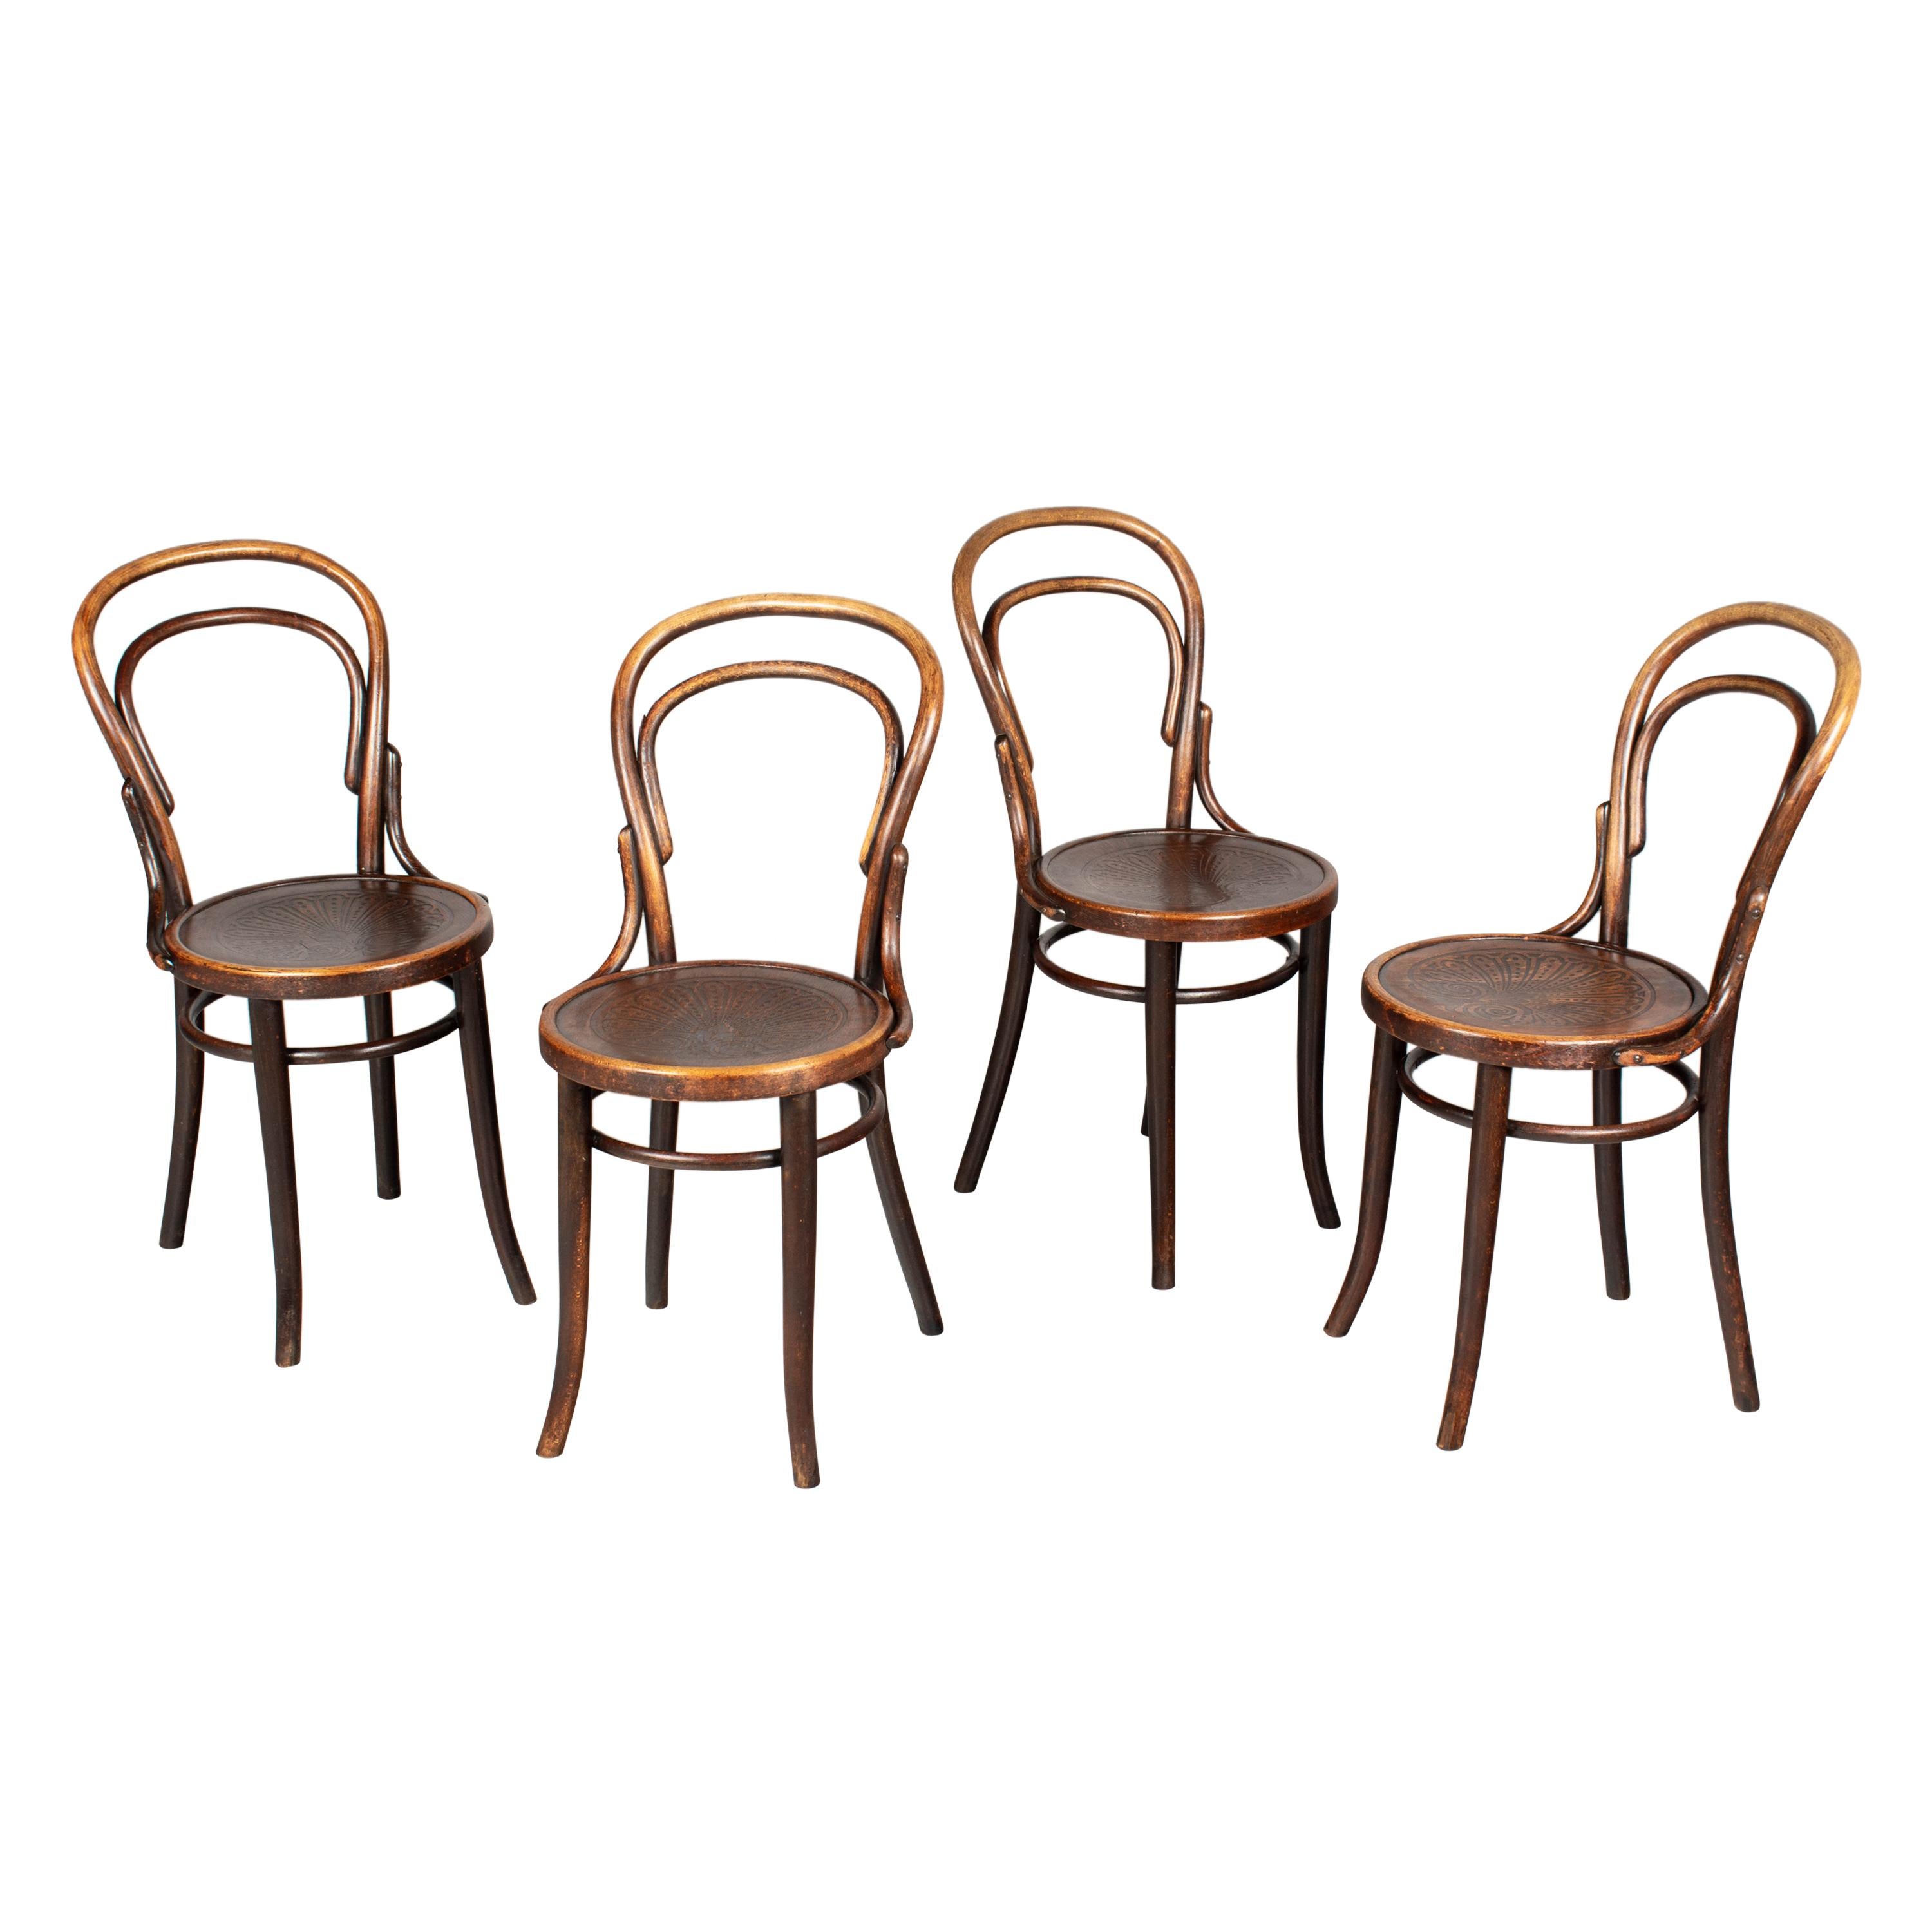 Thonet Style Bentwood Bistro Chairs, Set of 4